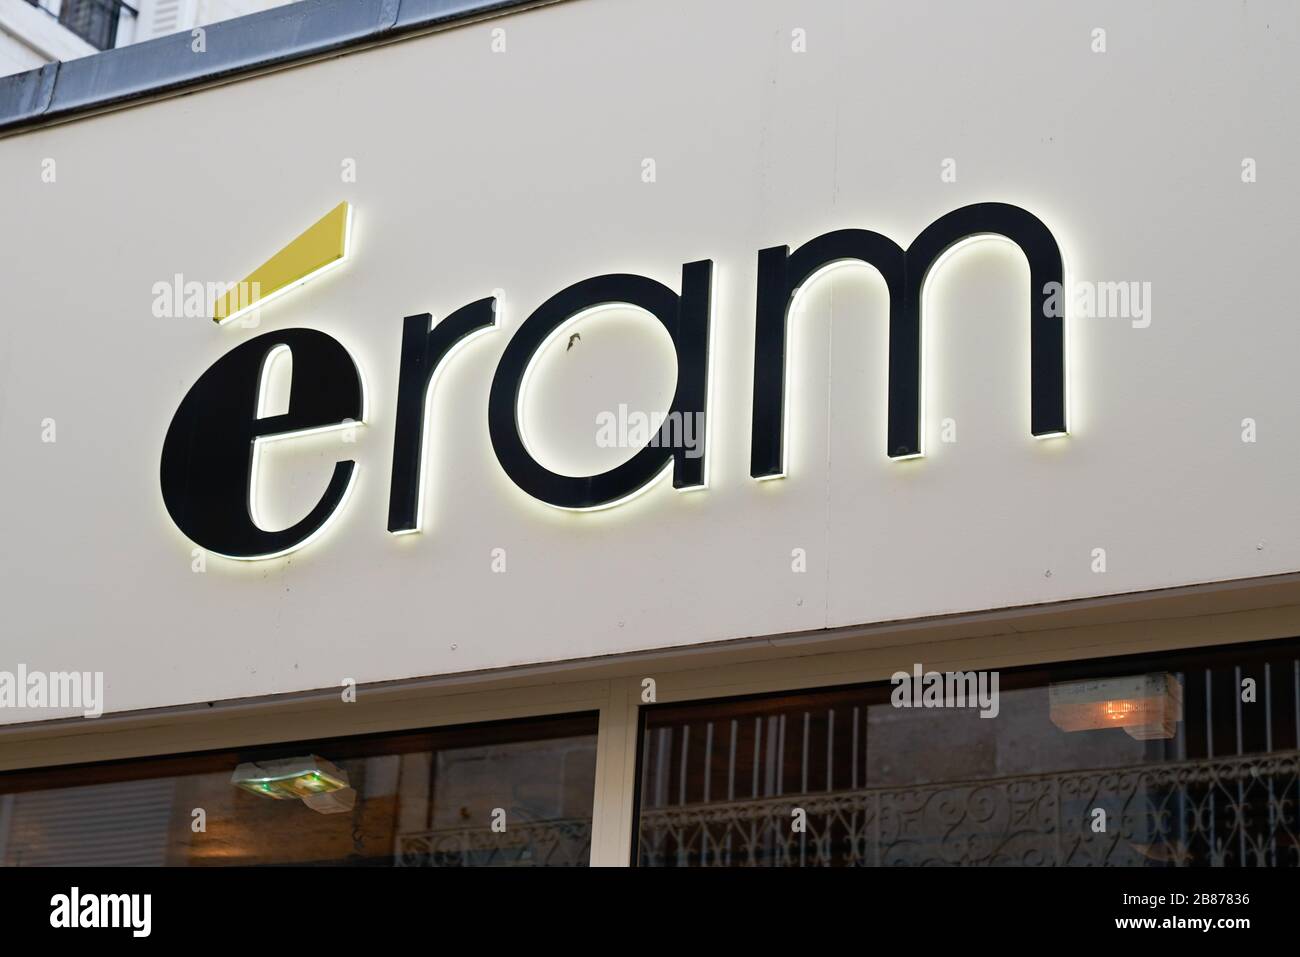 Eram Shoe Store High Resolution Stock Photography and Images - Alamy